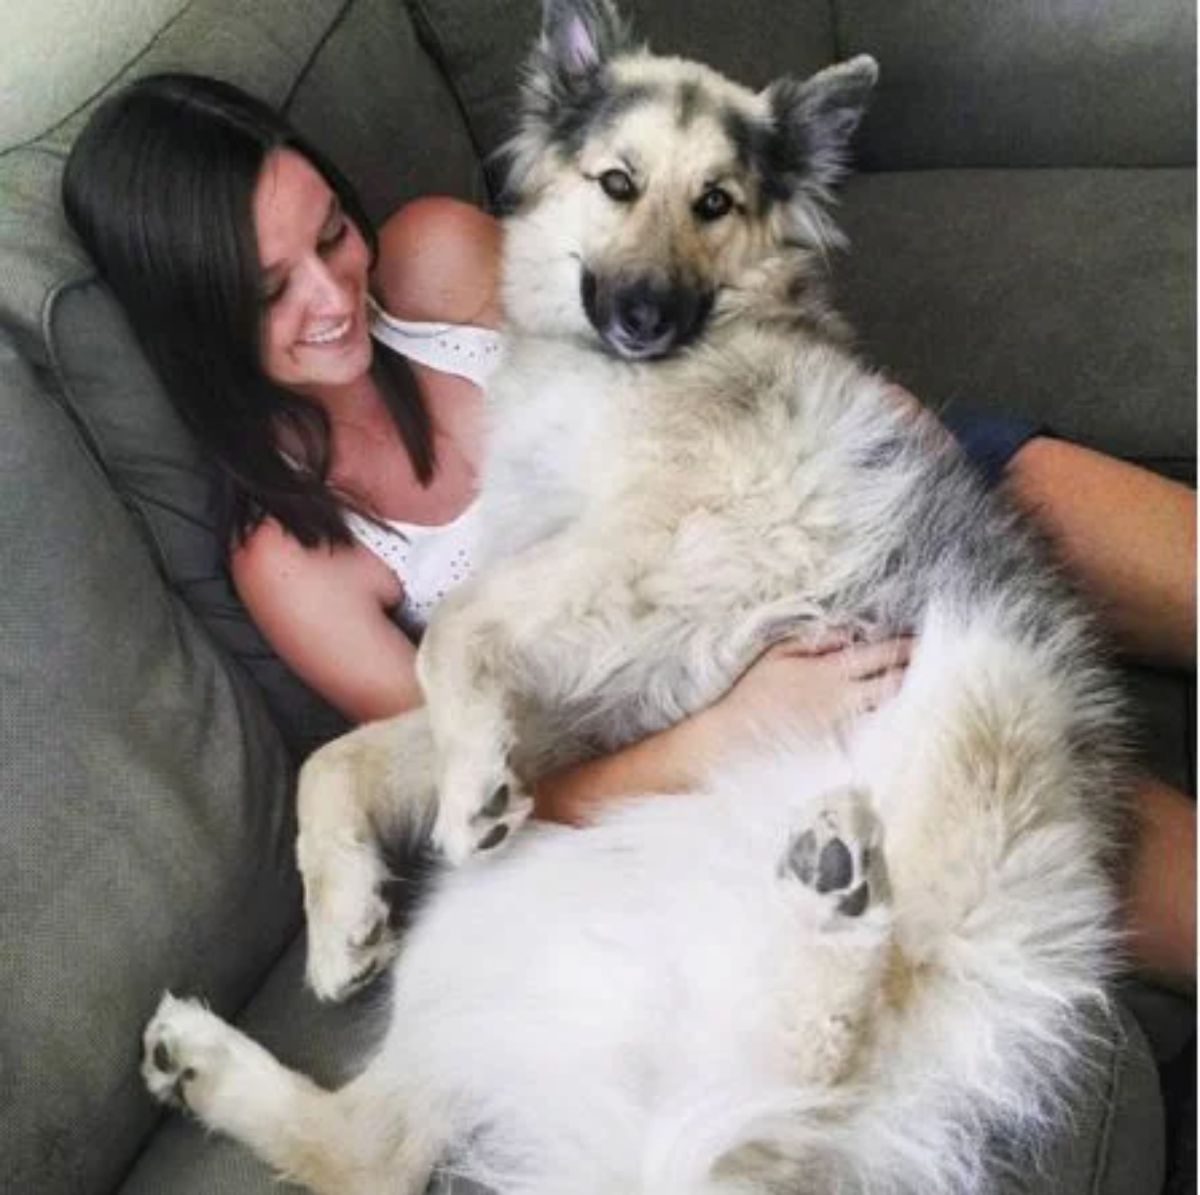 large fluffy white brown and grey dog laying on a woman's lap and being held